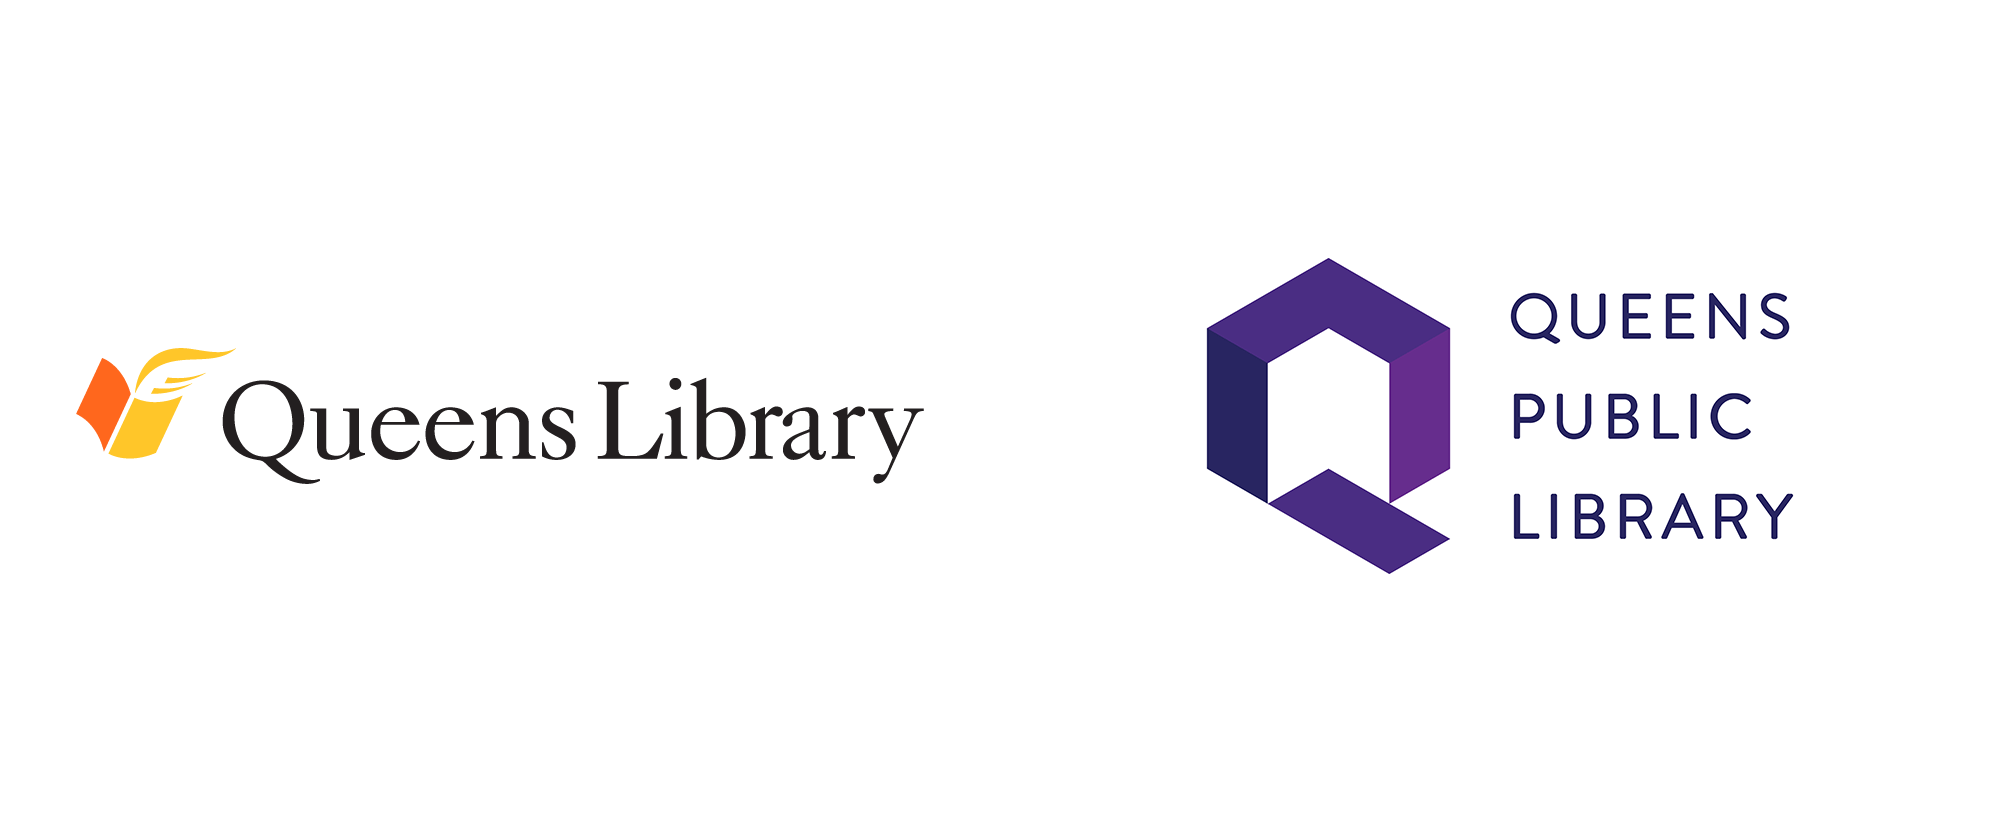 New Logo and Identity for Queens Public Library by Doublespace